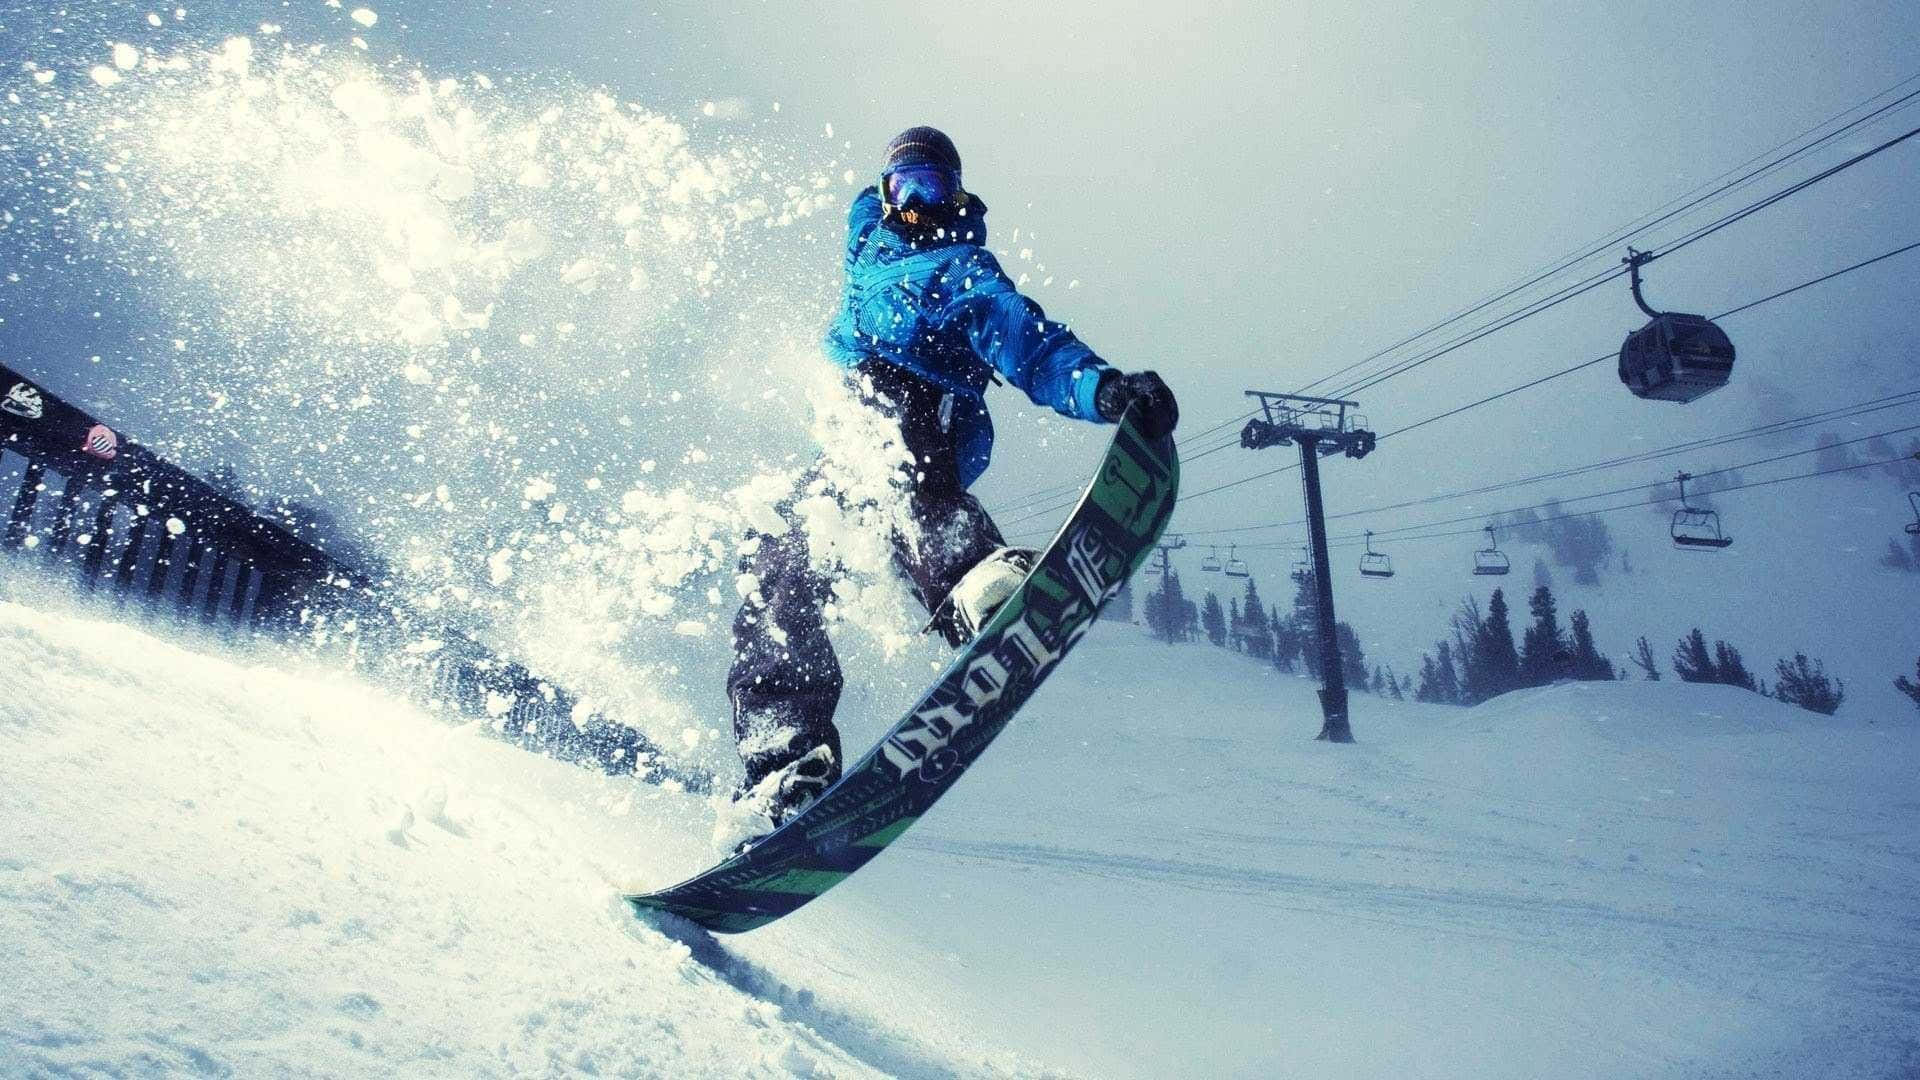 Exciting Winter Sports Action Wallpaper